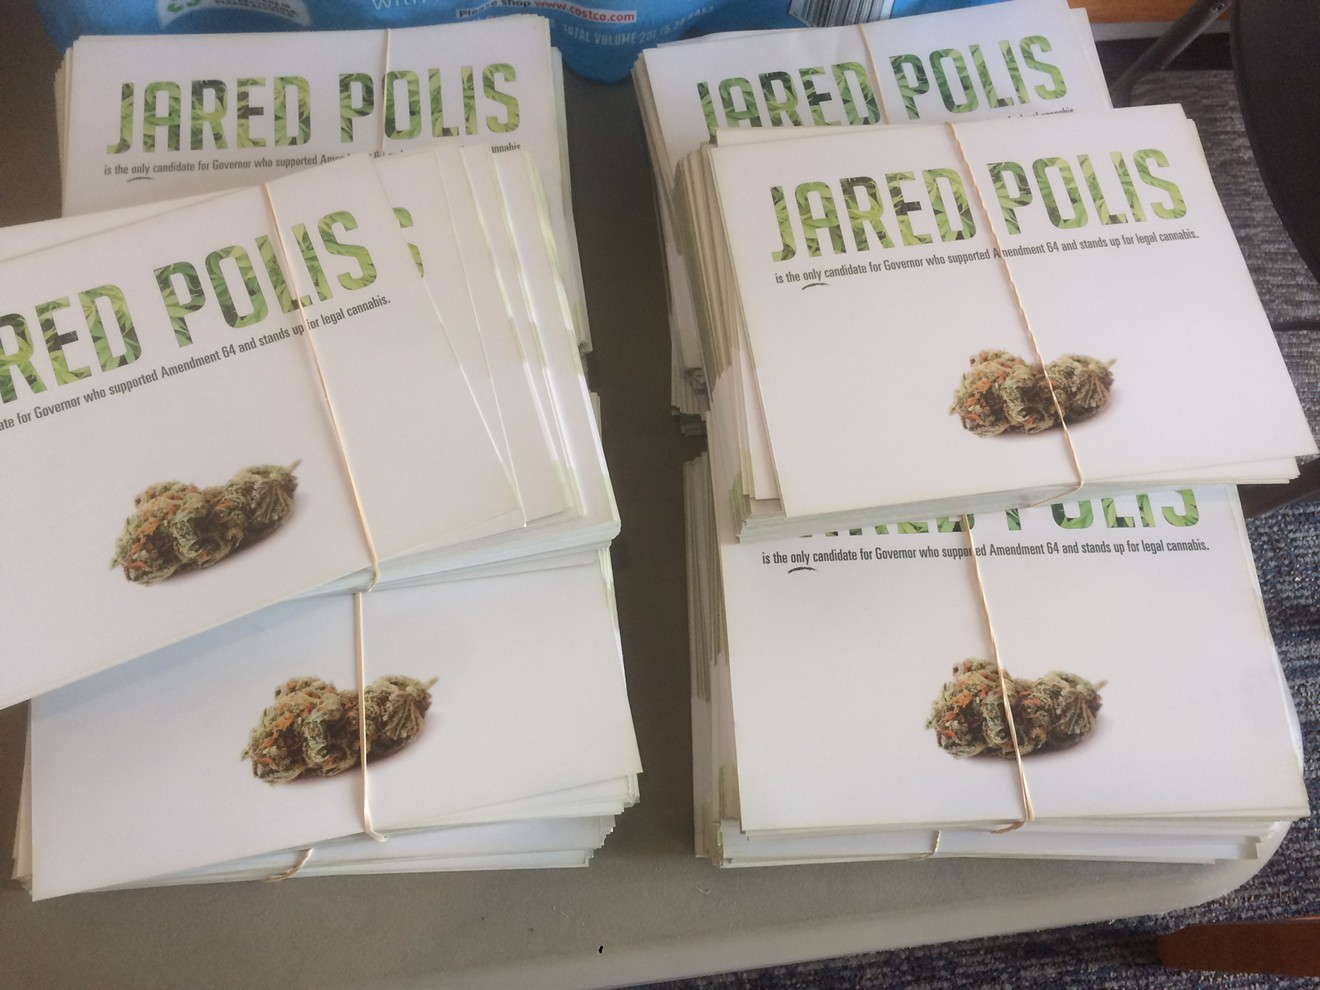 Jared Polis had supporters hand out literature to dispensaries on June 8.